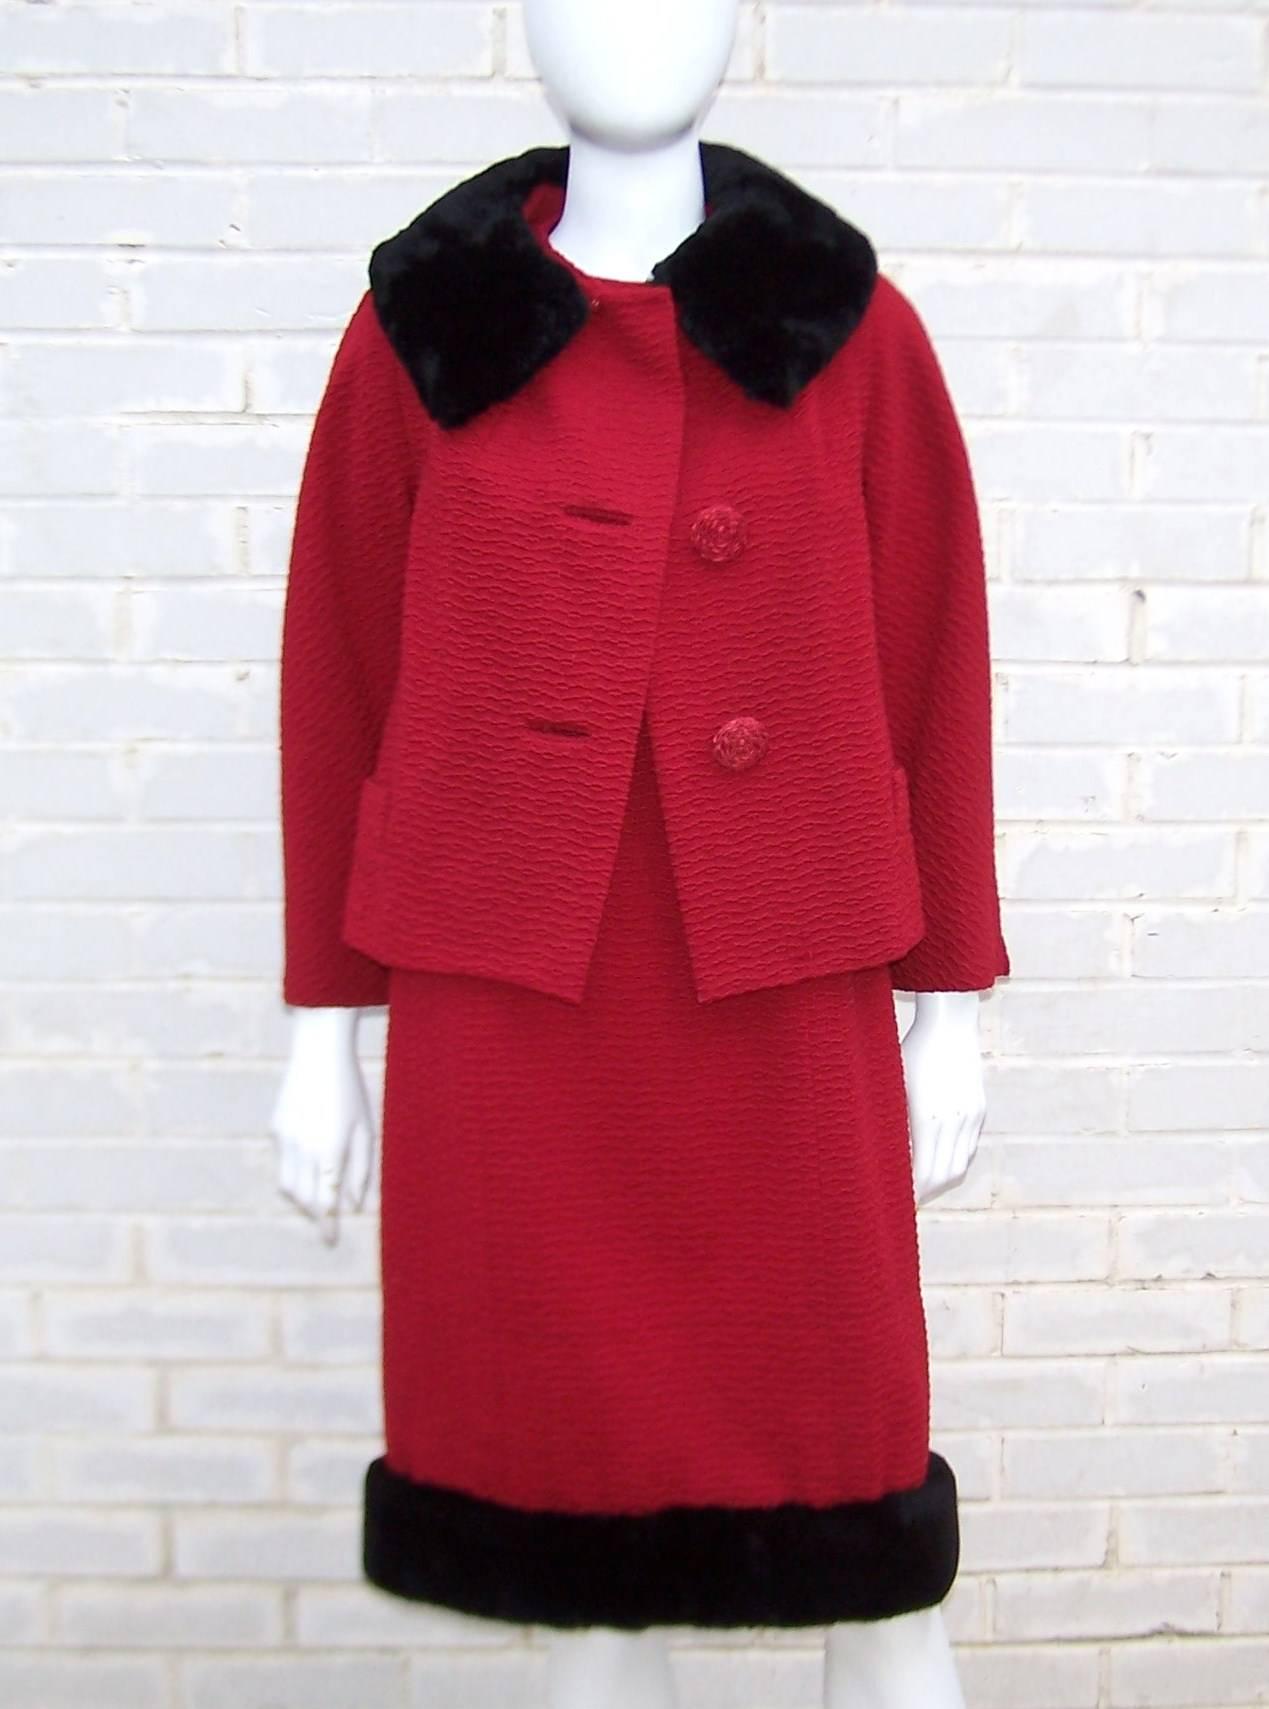 This two piece fur trimmed dress and jacket ensemble is reminiscent of Alfred Hitchcock's heroines from the 1950's...picture Eva Marie Saint, Tippi Hedren or Grace Kelly, to name a few.  Classy, cool and ladylike!  Both pieces are a textured cherry